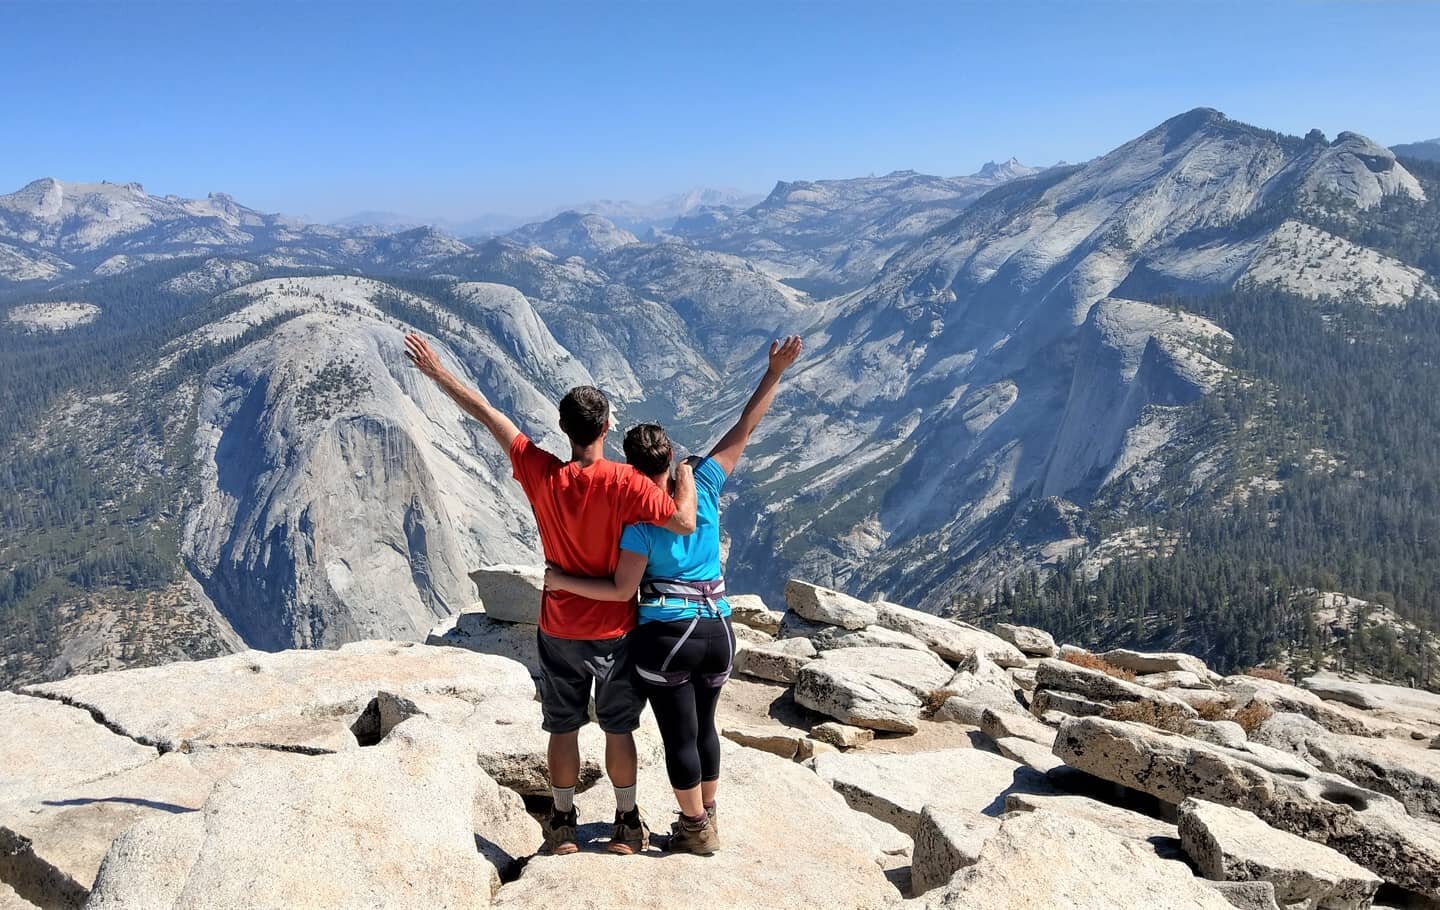 WANT TO CLIMB HALF DOME?&nbsp; The lottery is OPEN!

Climbing Half Dome in Yosemite is a bucketlist hike for sure.&nbsp; I remember seeing those cables on the final steep stretch up the granite slab and *slightly* freaking out, but the accomplishment